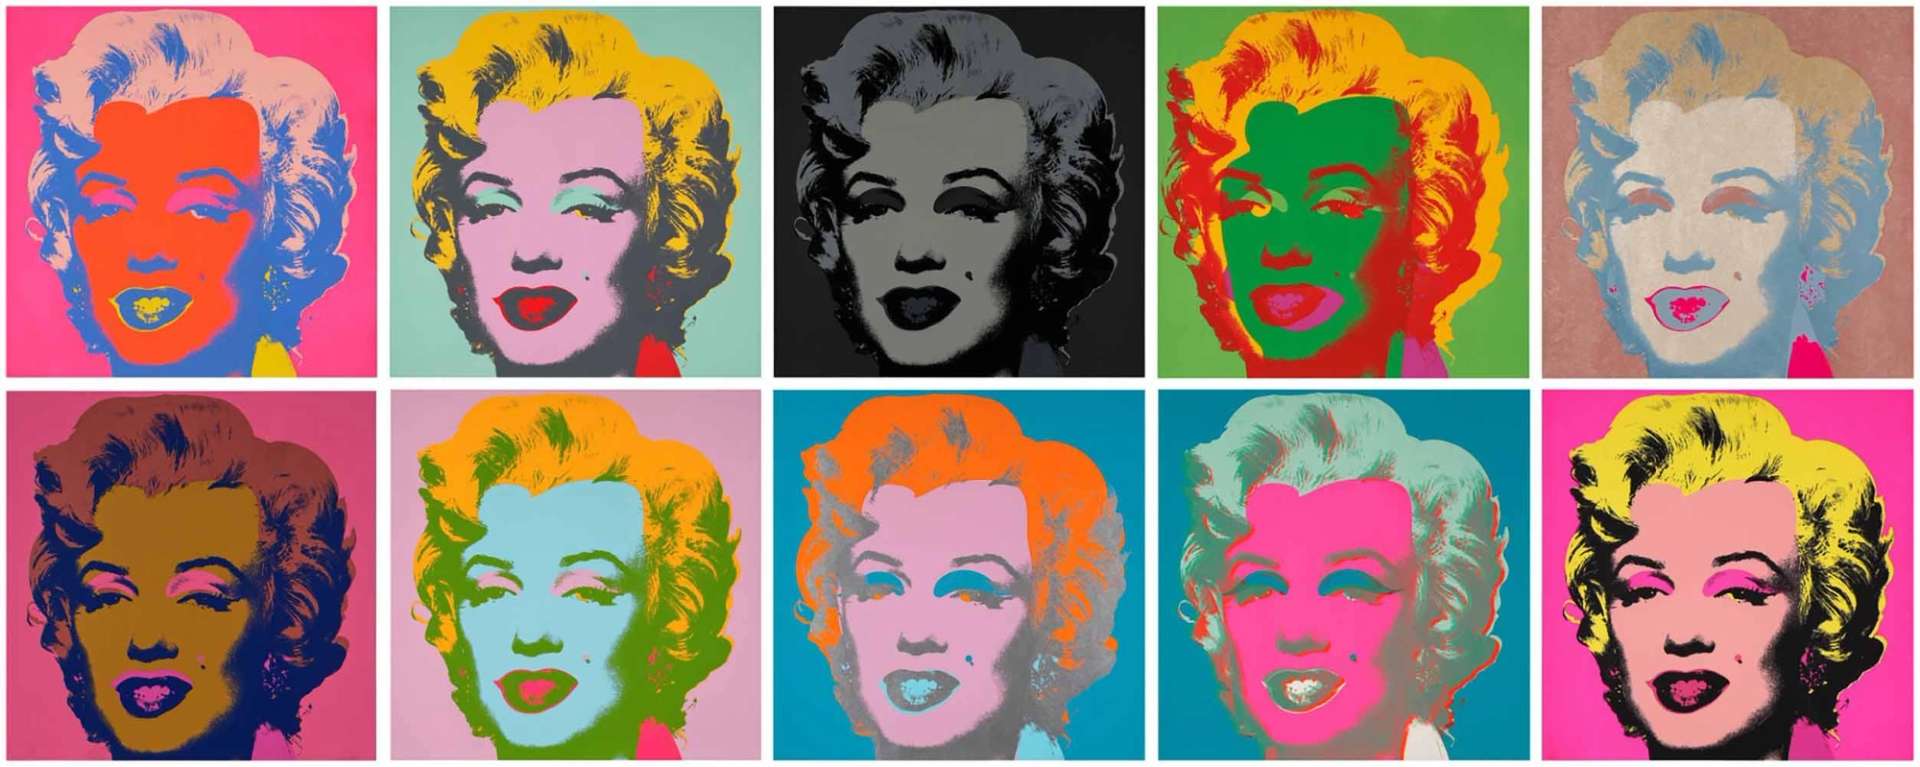 A collage of Marilyn Monroe prints by Andy Warhol, each vibrantly coloured in a different way.